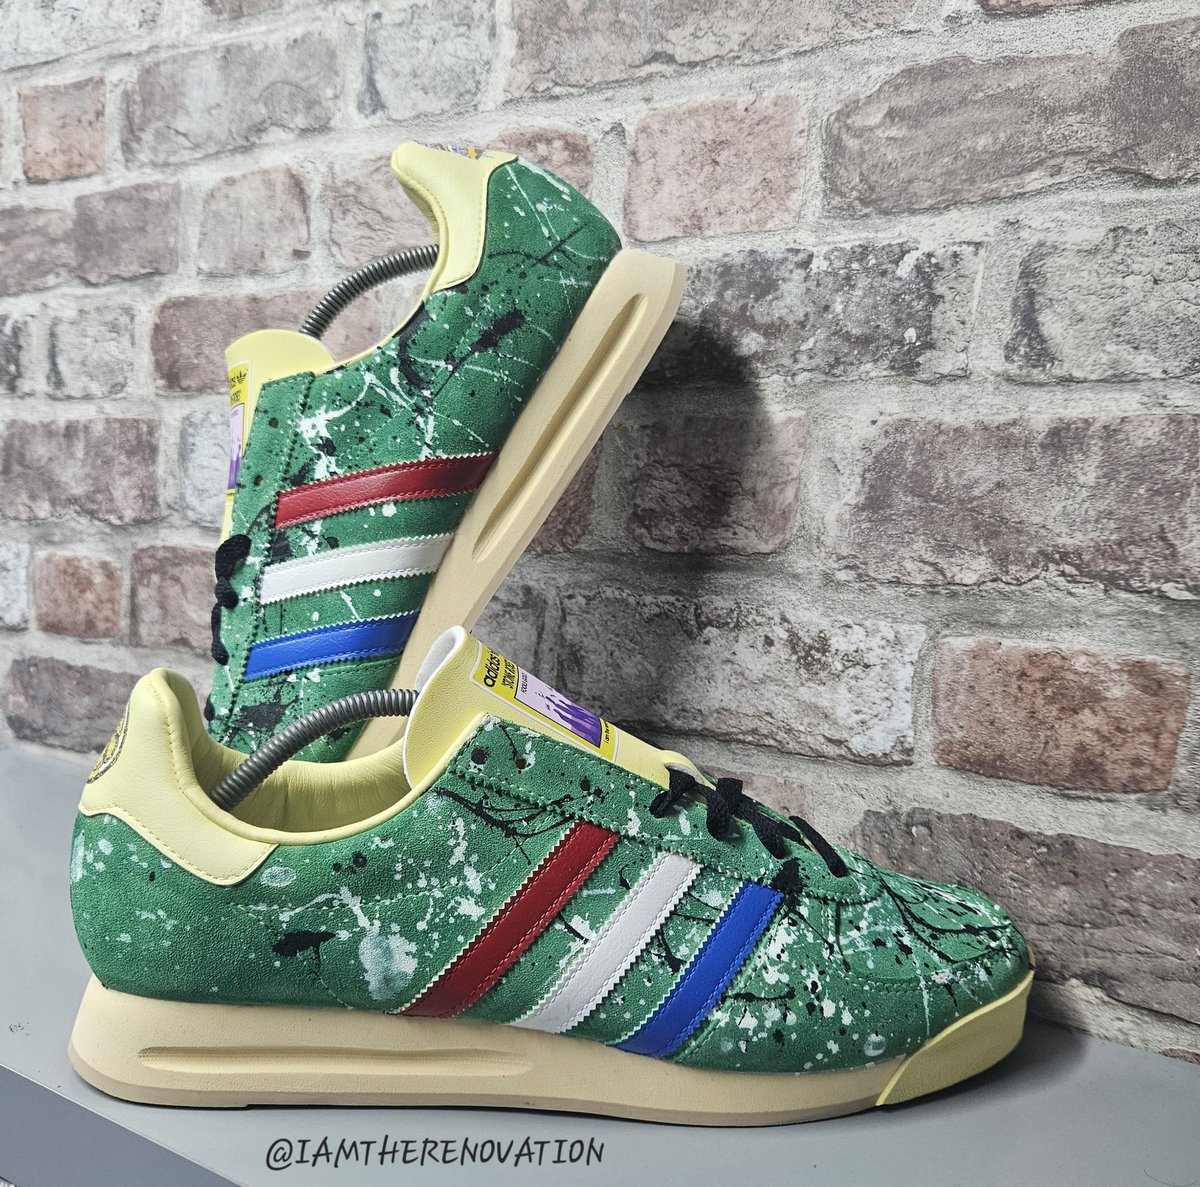 Stone Roses 1/1 AS520 Custom These pale yellow Adidas AS520 were re-dyed and customised for our latest display on stall at the fantastic Manchester Adored event at Bowlers Exhibition centre. avaliable to purchase via DM #iamtherenovation #stoneroses #thestoneroses #adored